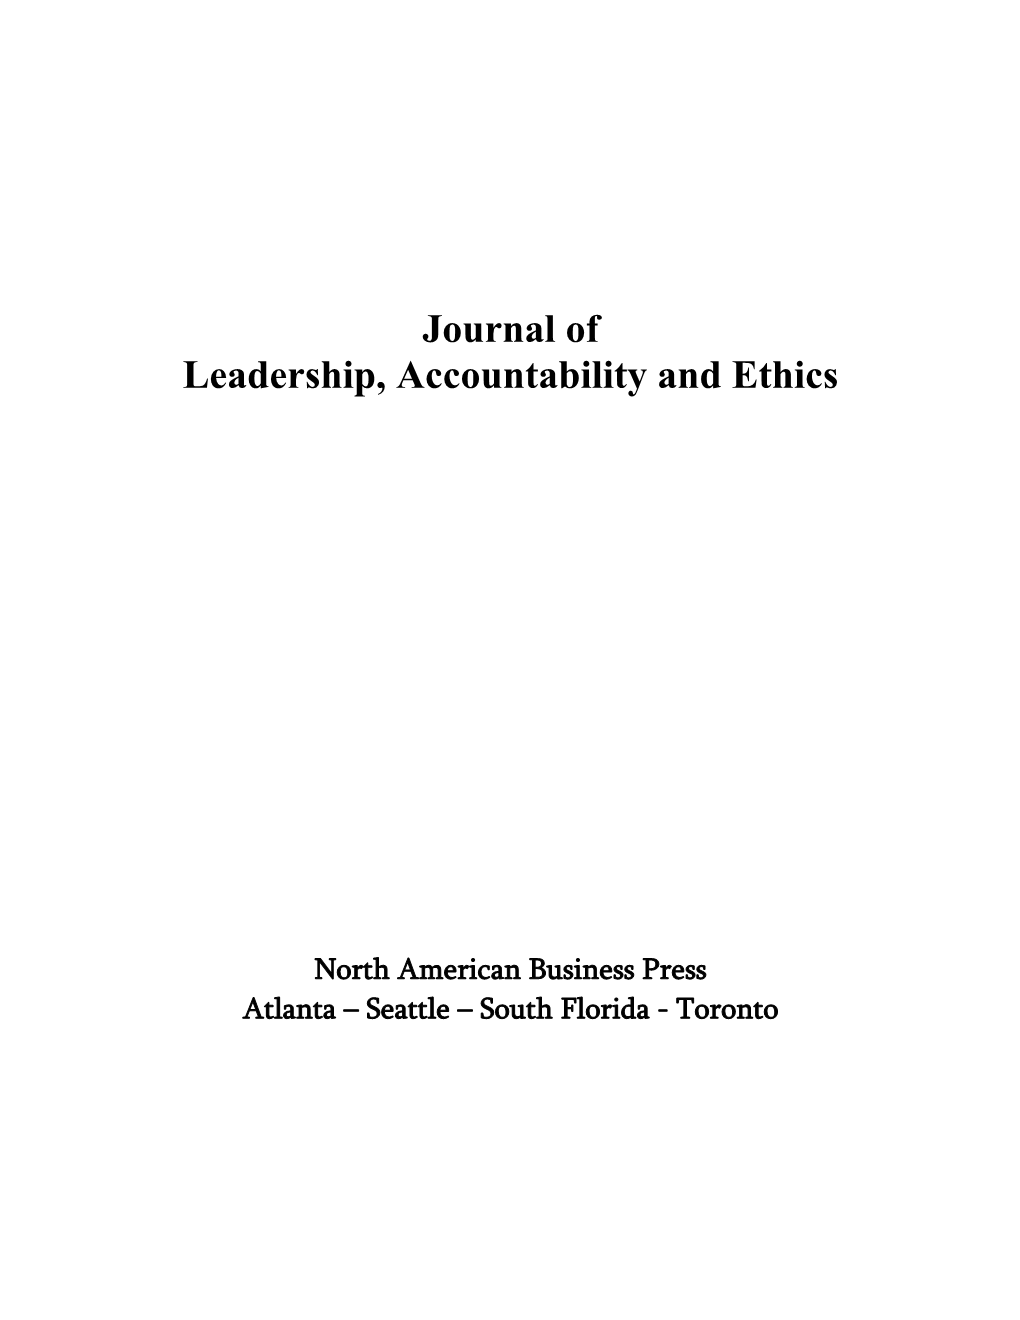 Journal of Leadership, Accountability and Ethics